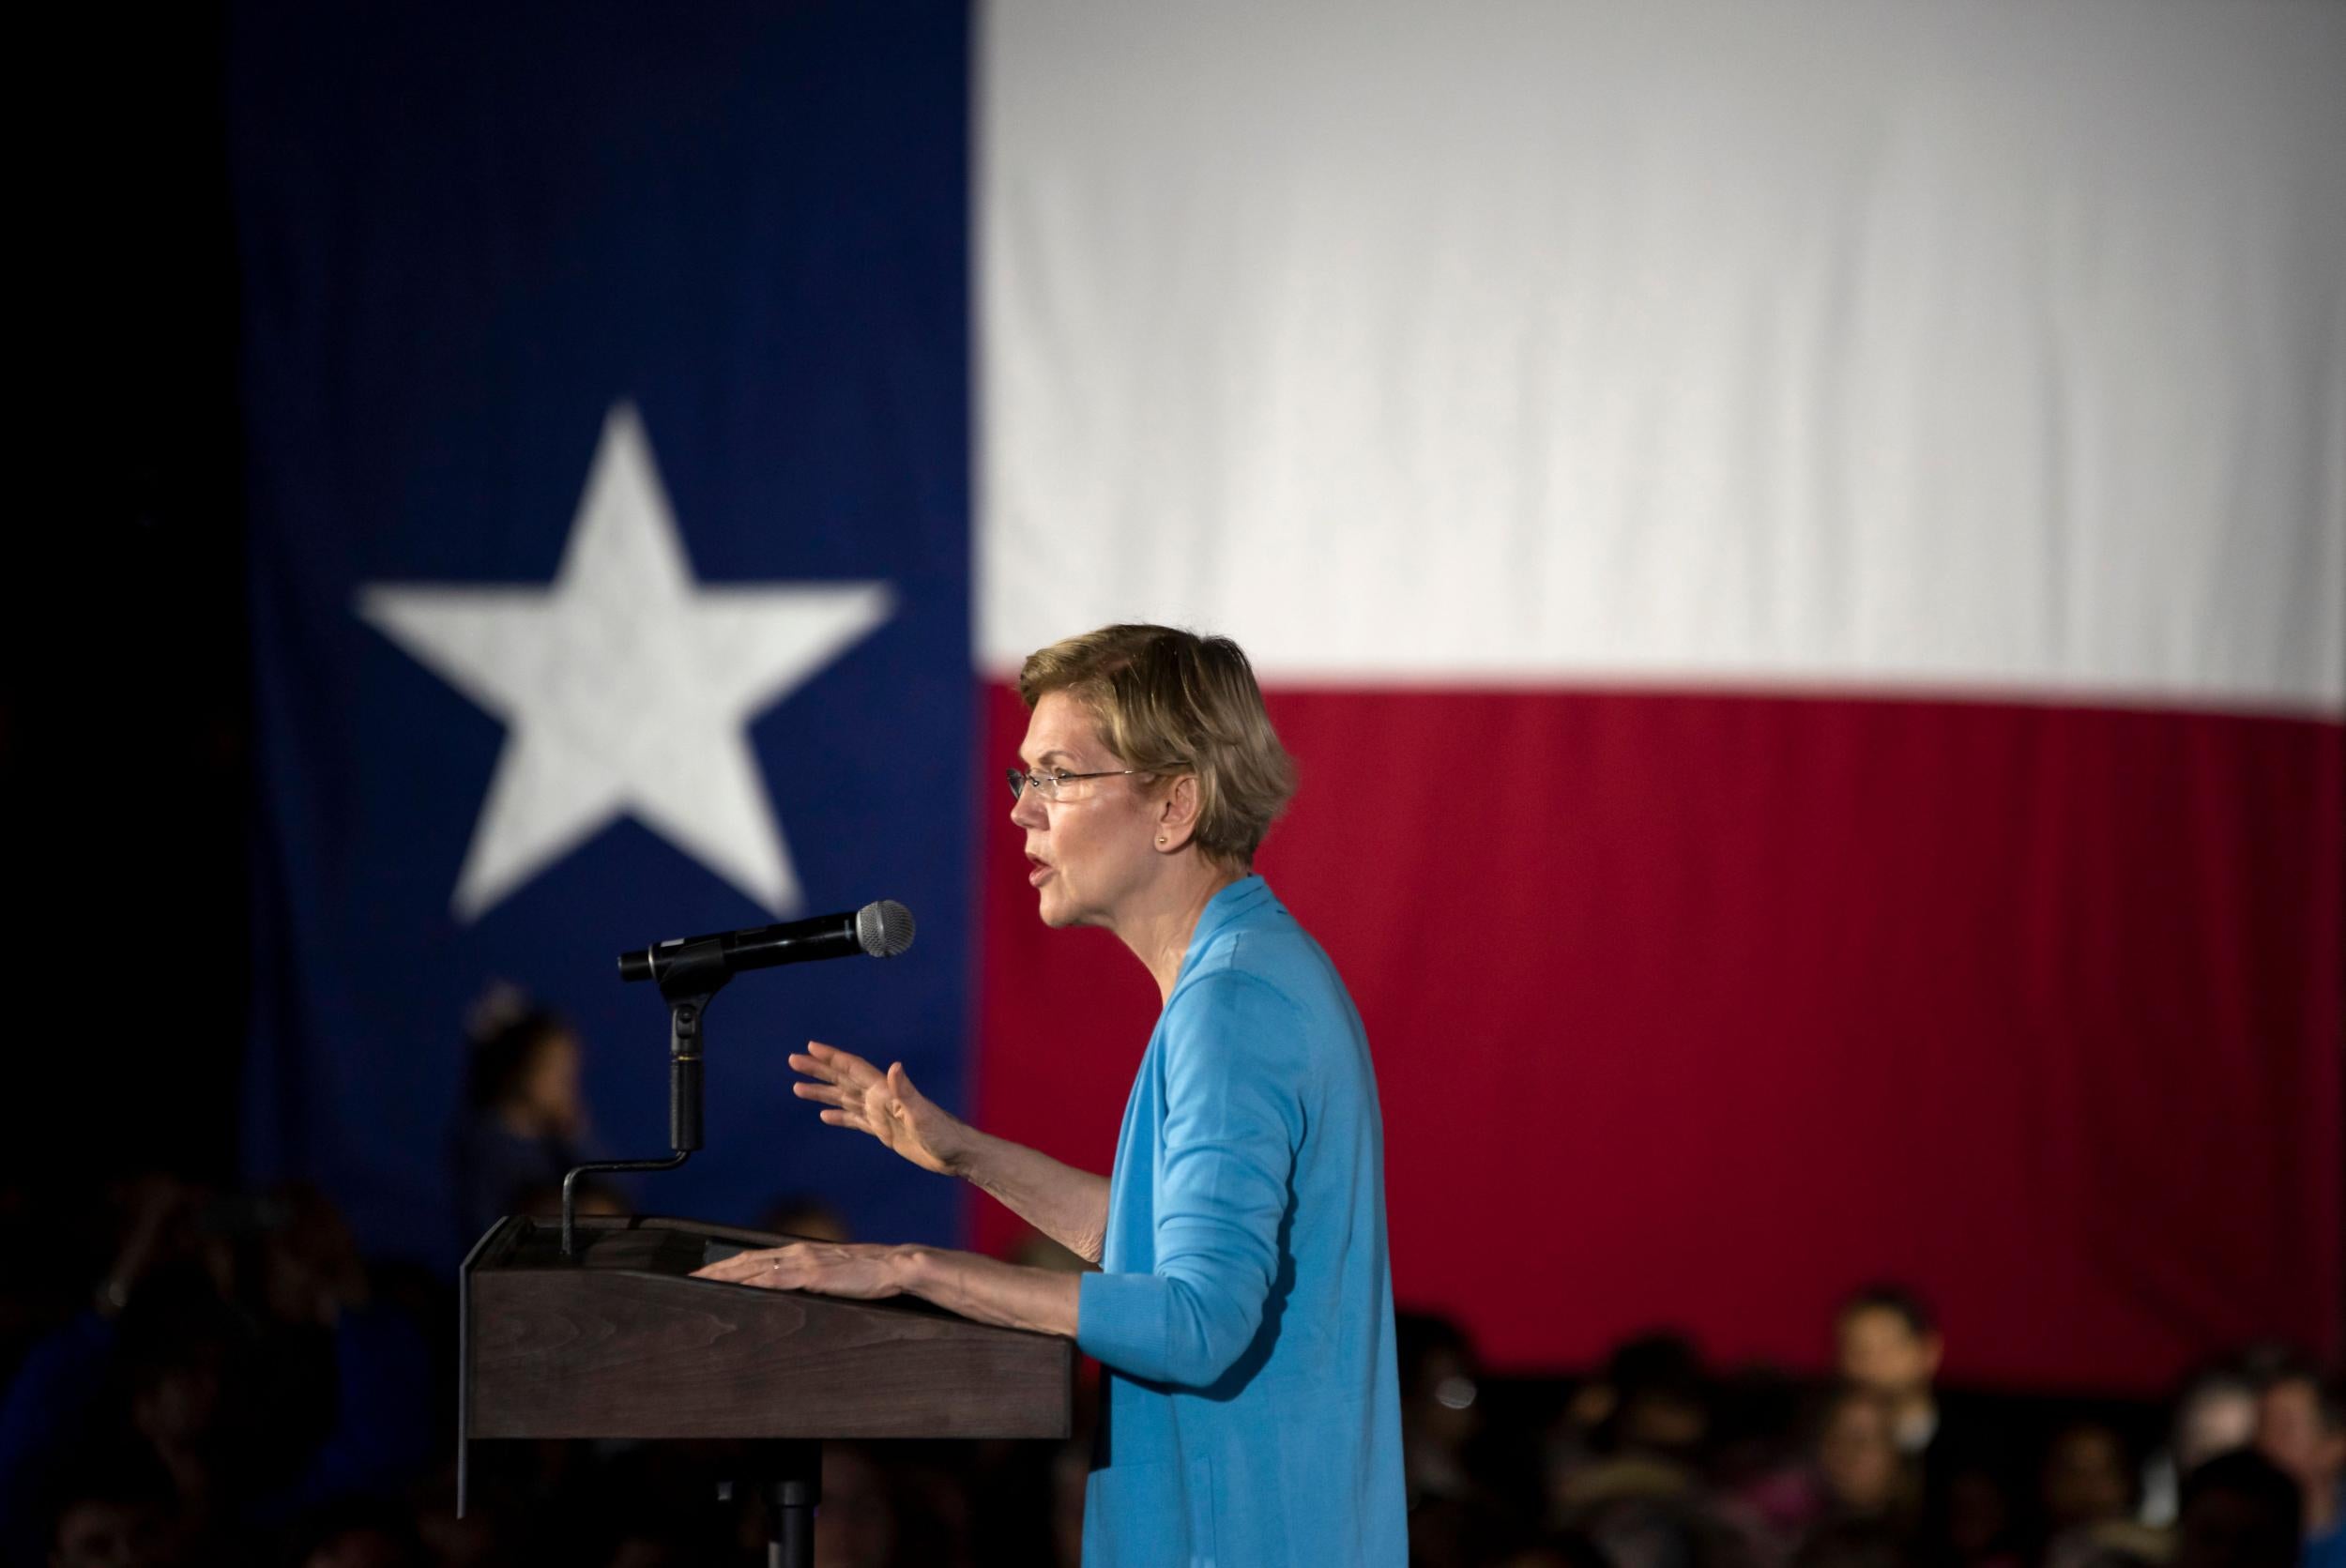 Elizabeth Warren tells supporters in Texas 'we want to gain as many delegates to the convention as we can'.